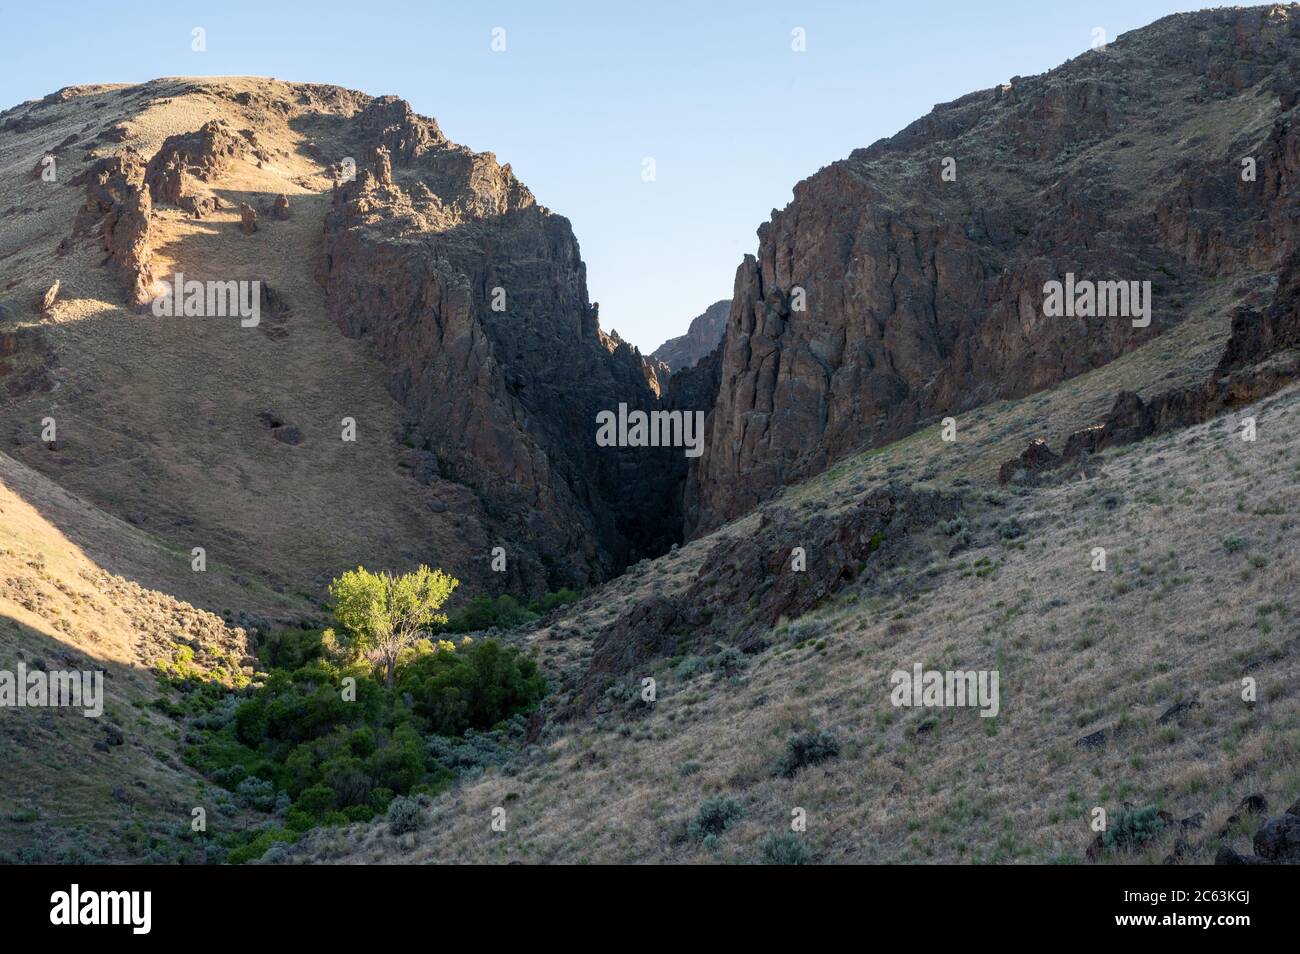 Rock formations with sage brush Stock Photo